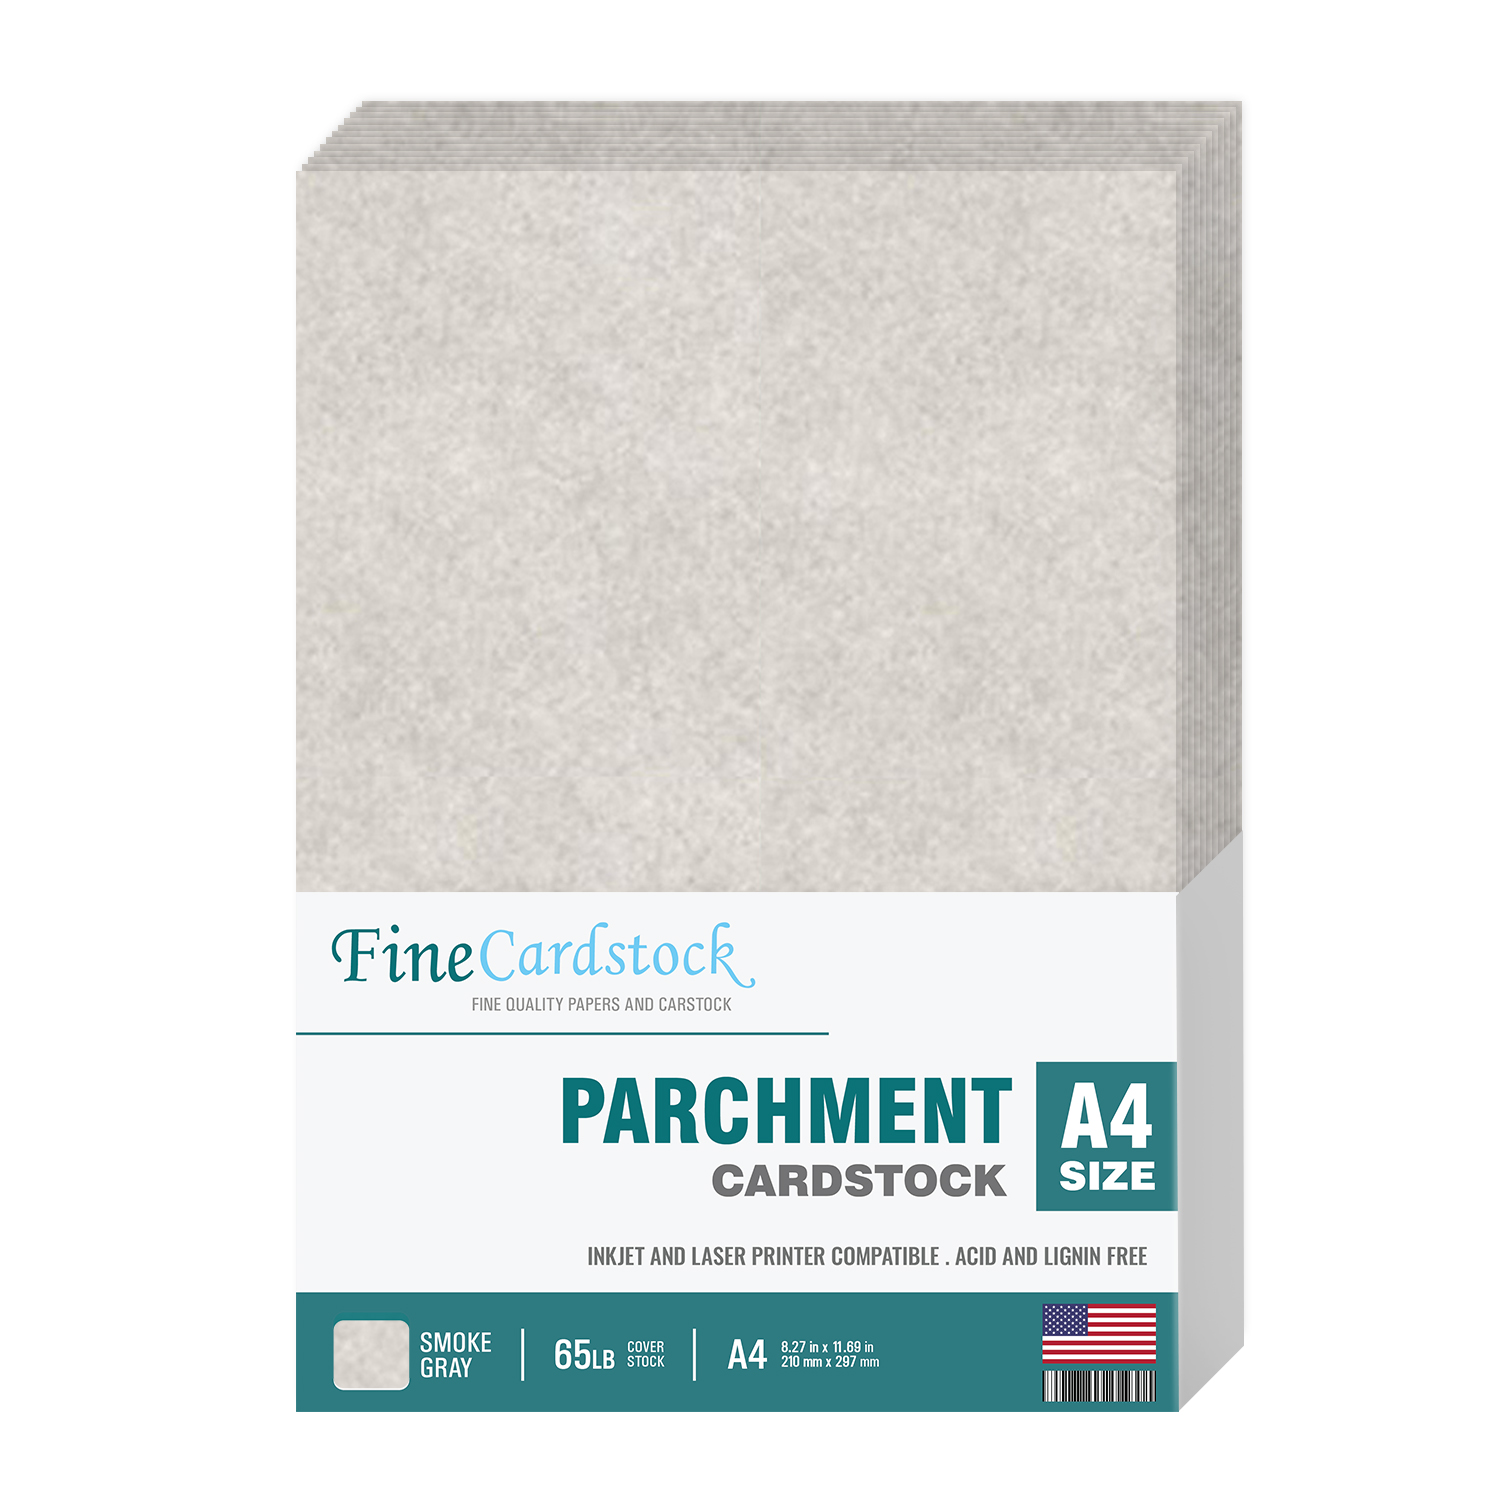 A5 A4 OR A3 PREMIUM QUALITY SMOOTH 90gsm GREY PARCHMENT PAPER FOR ART & CRAFTS.